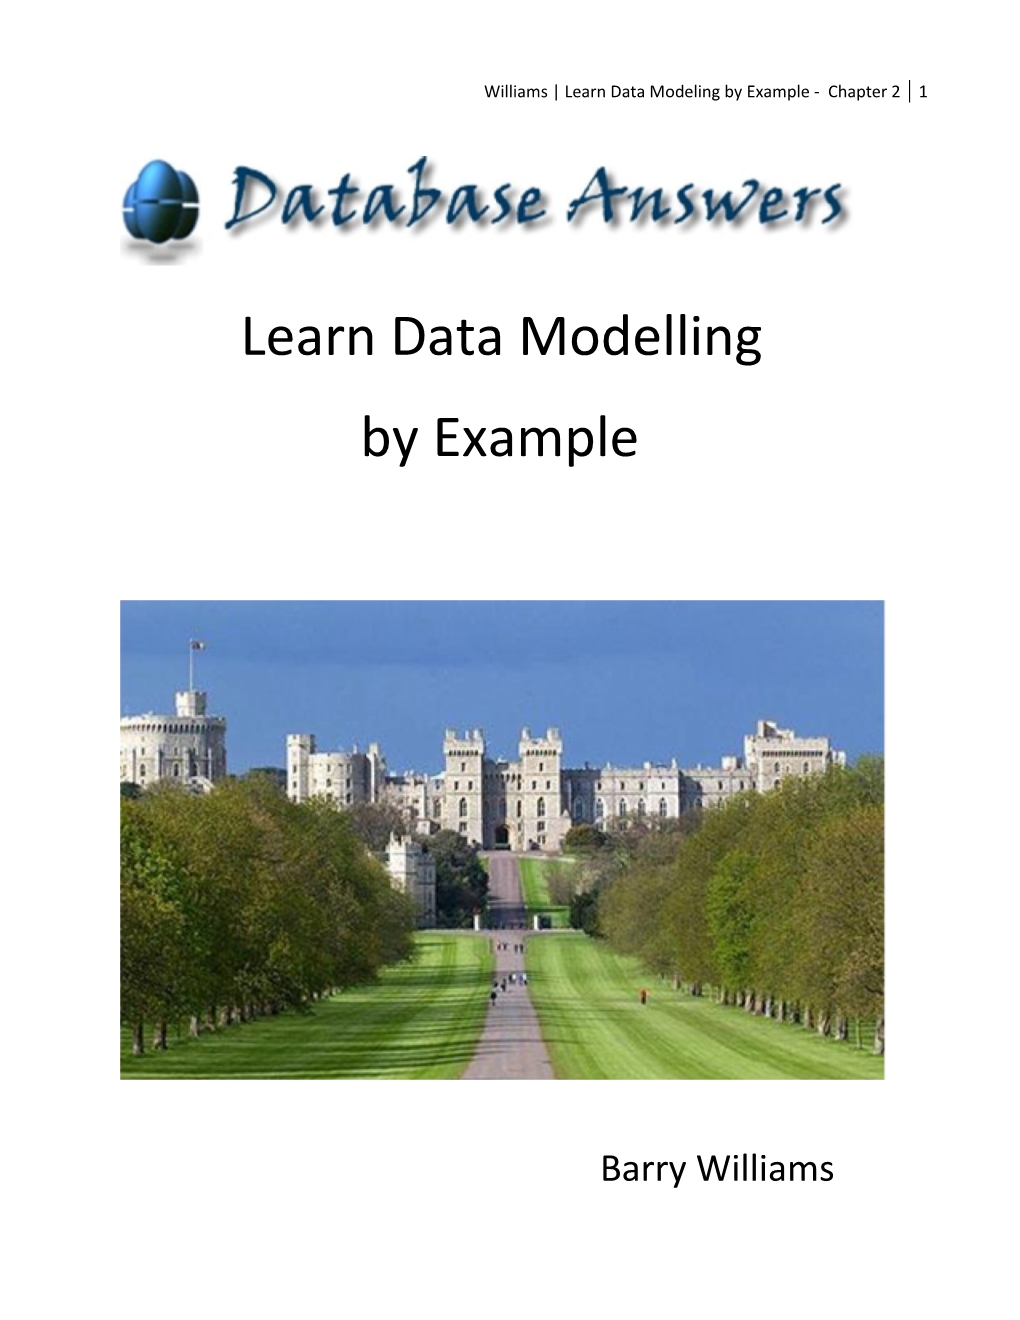 Learn Data Modelling by Example